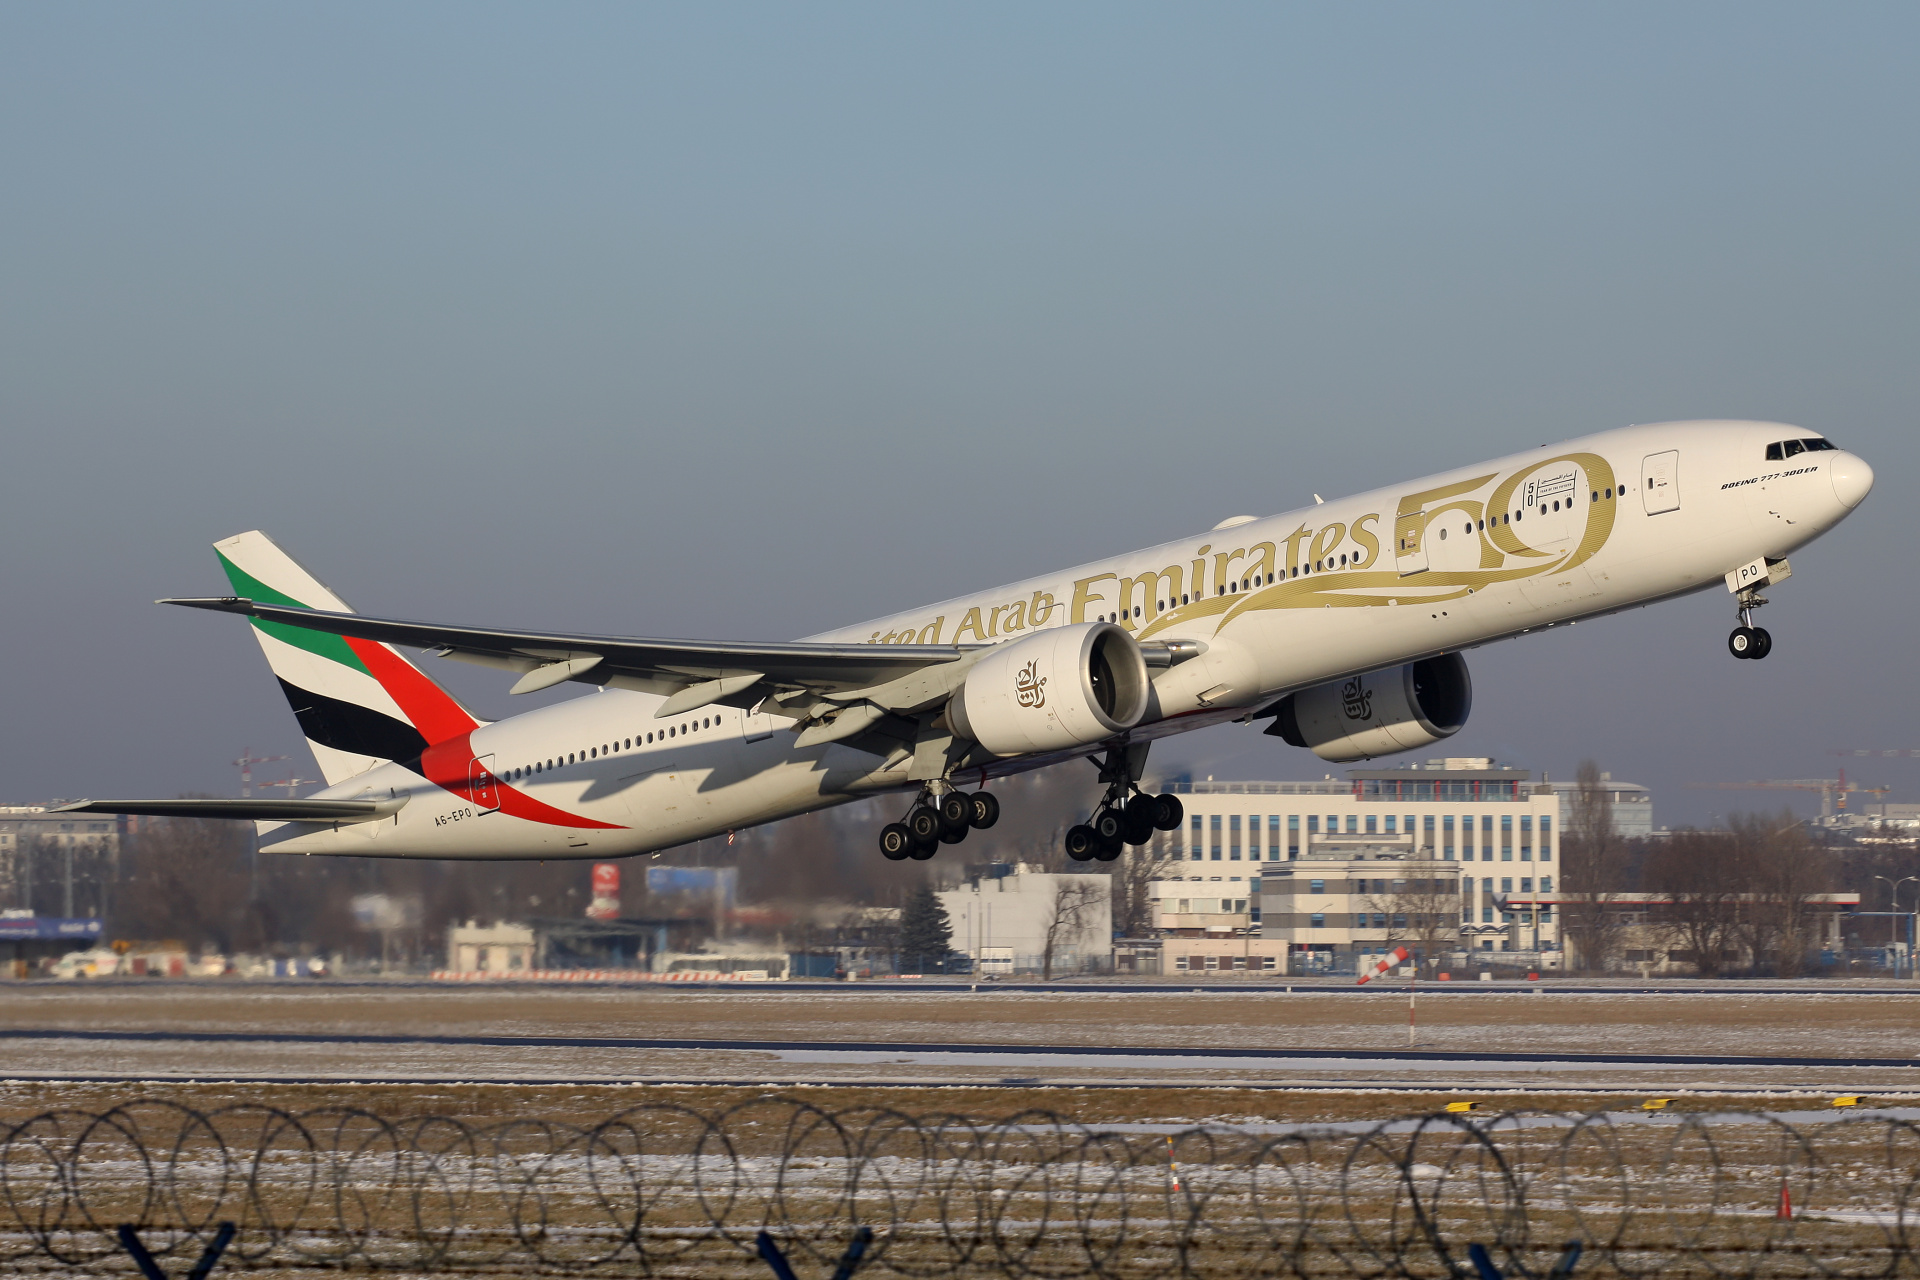 A6-EPO (Year of the Fiftieth livery) (Aircraft » EPWA Spotting » Boeing 777-300ER » Emirates)